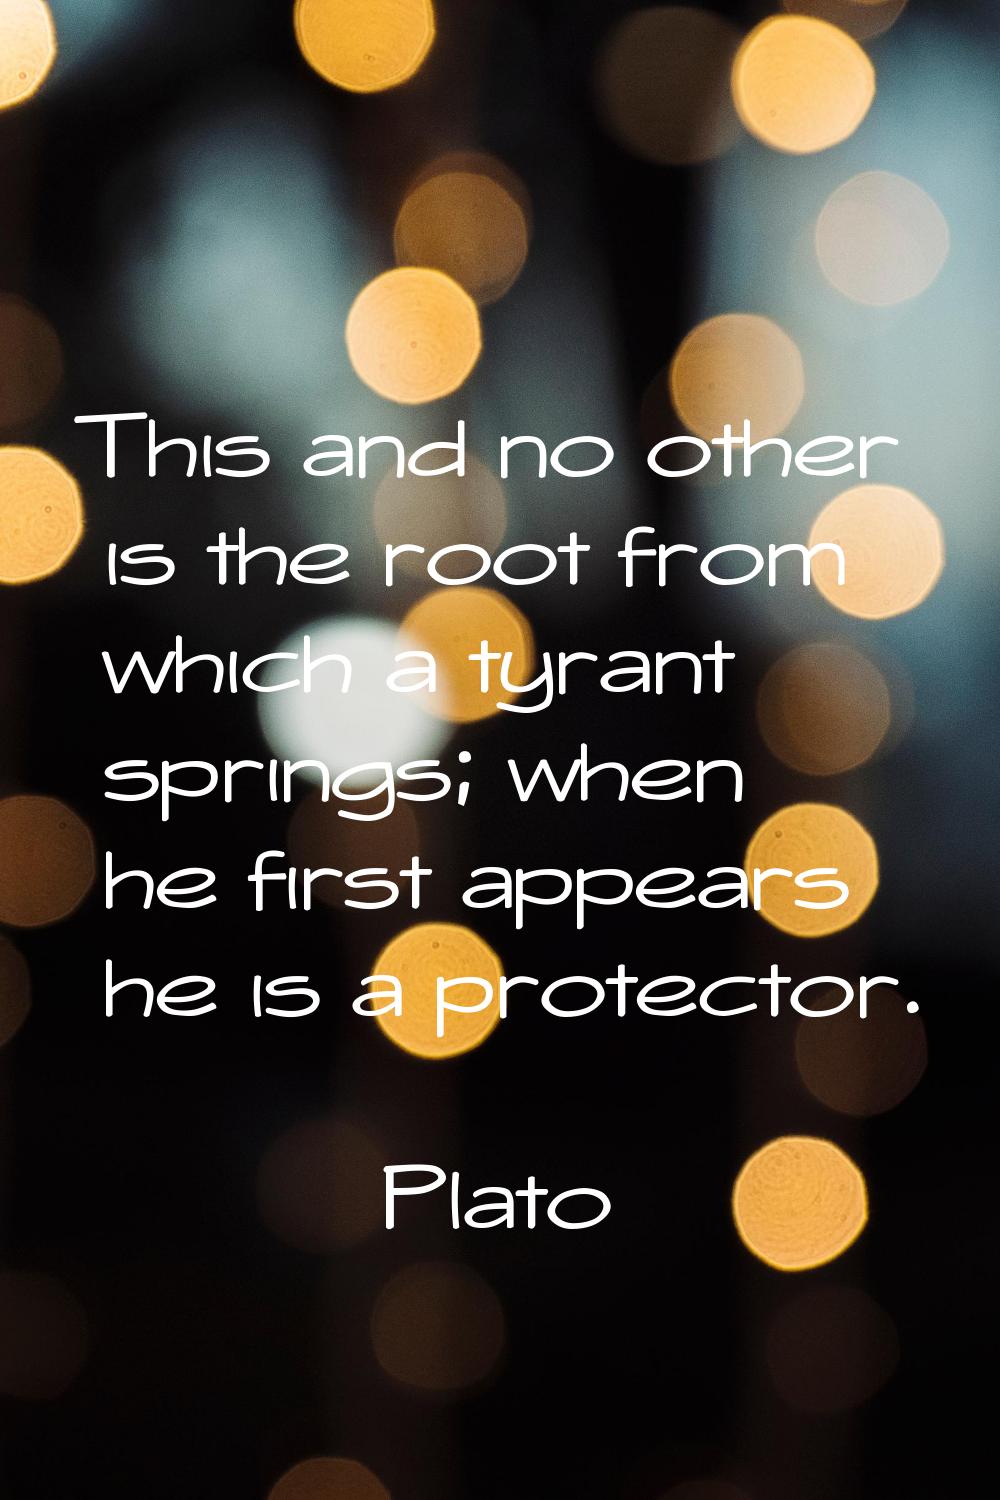 This and no other is the root from which a tyrant springs; when he first appears he is a protector.